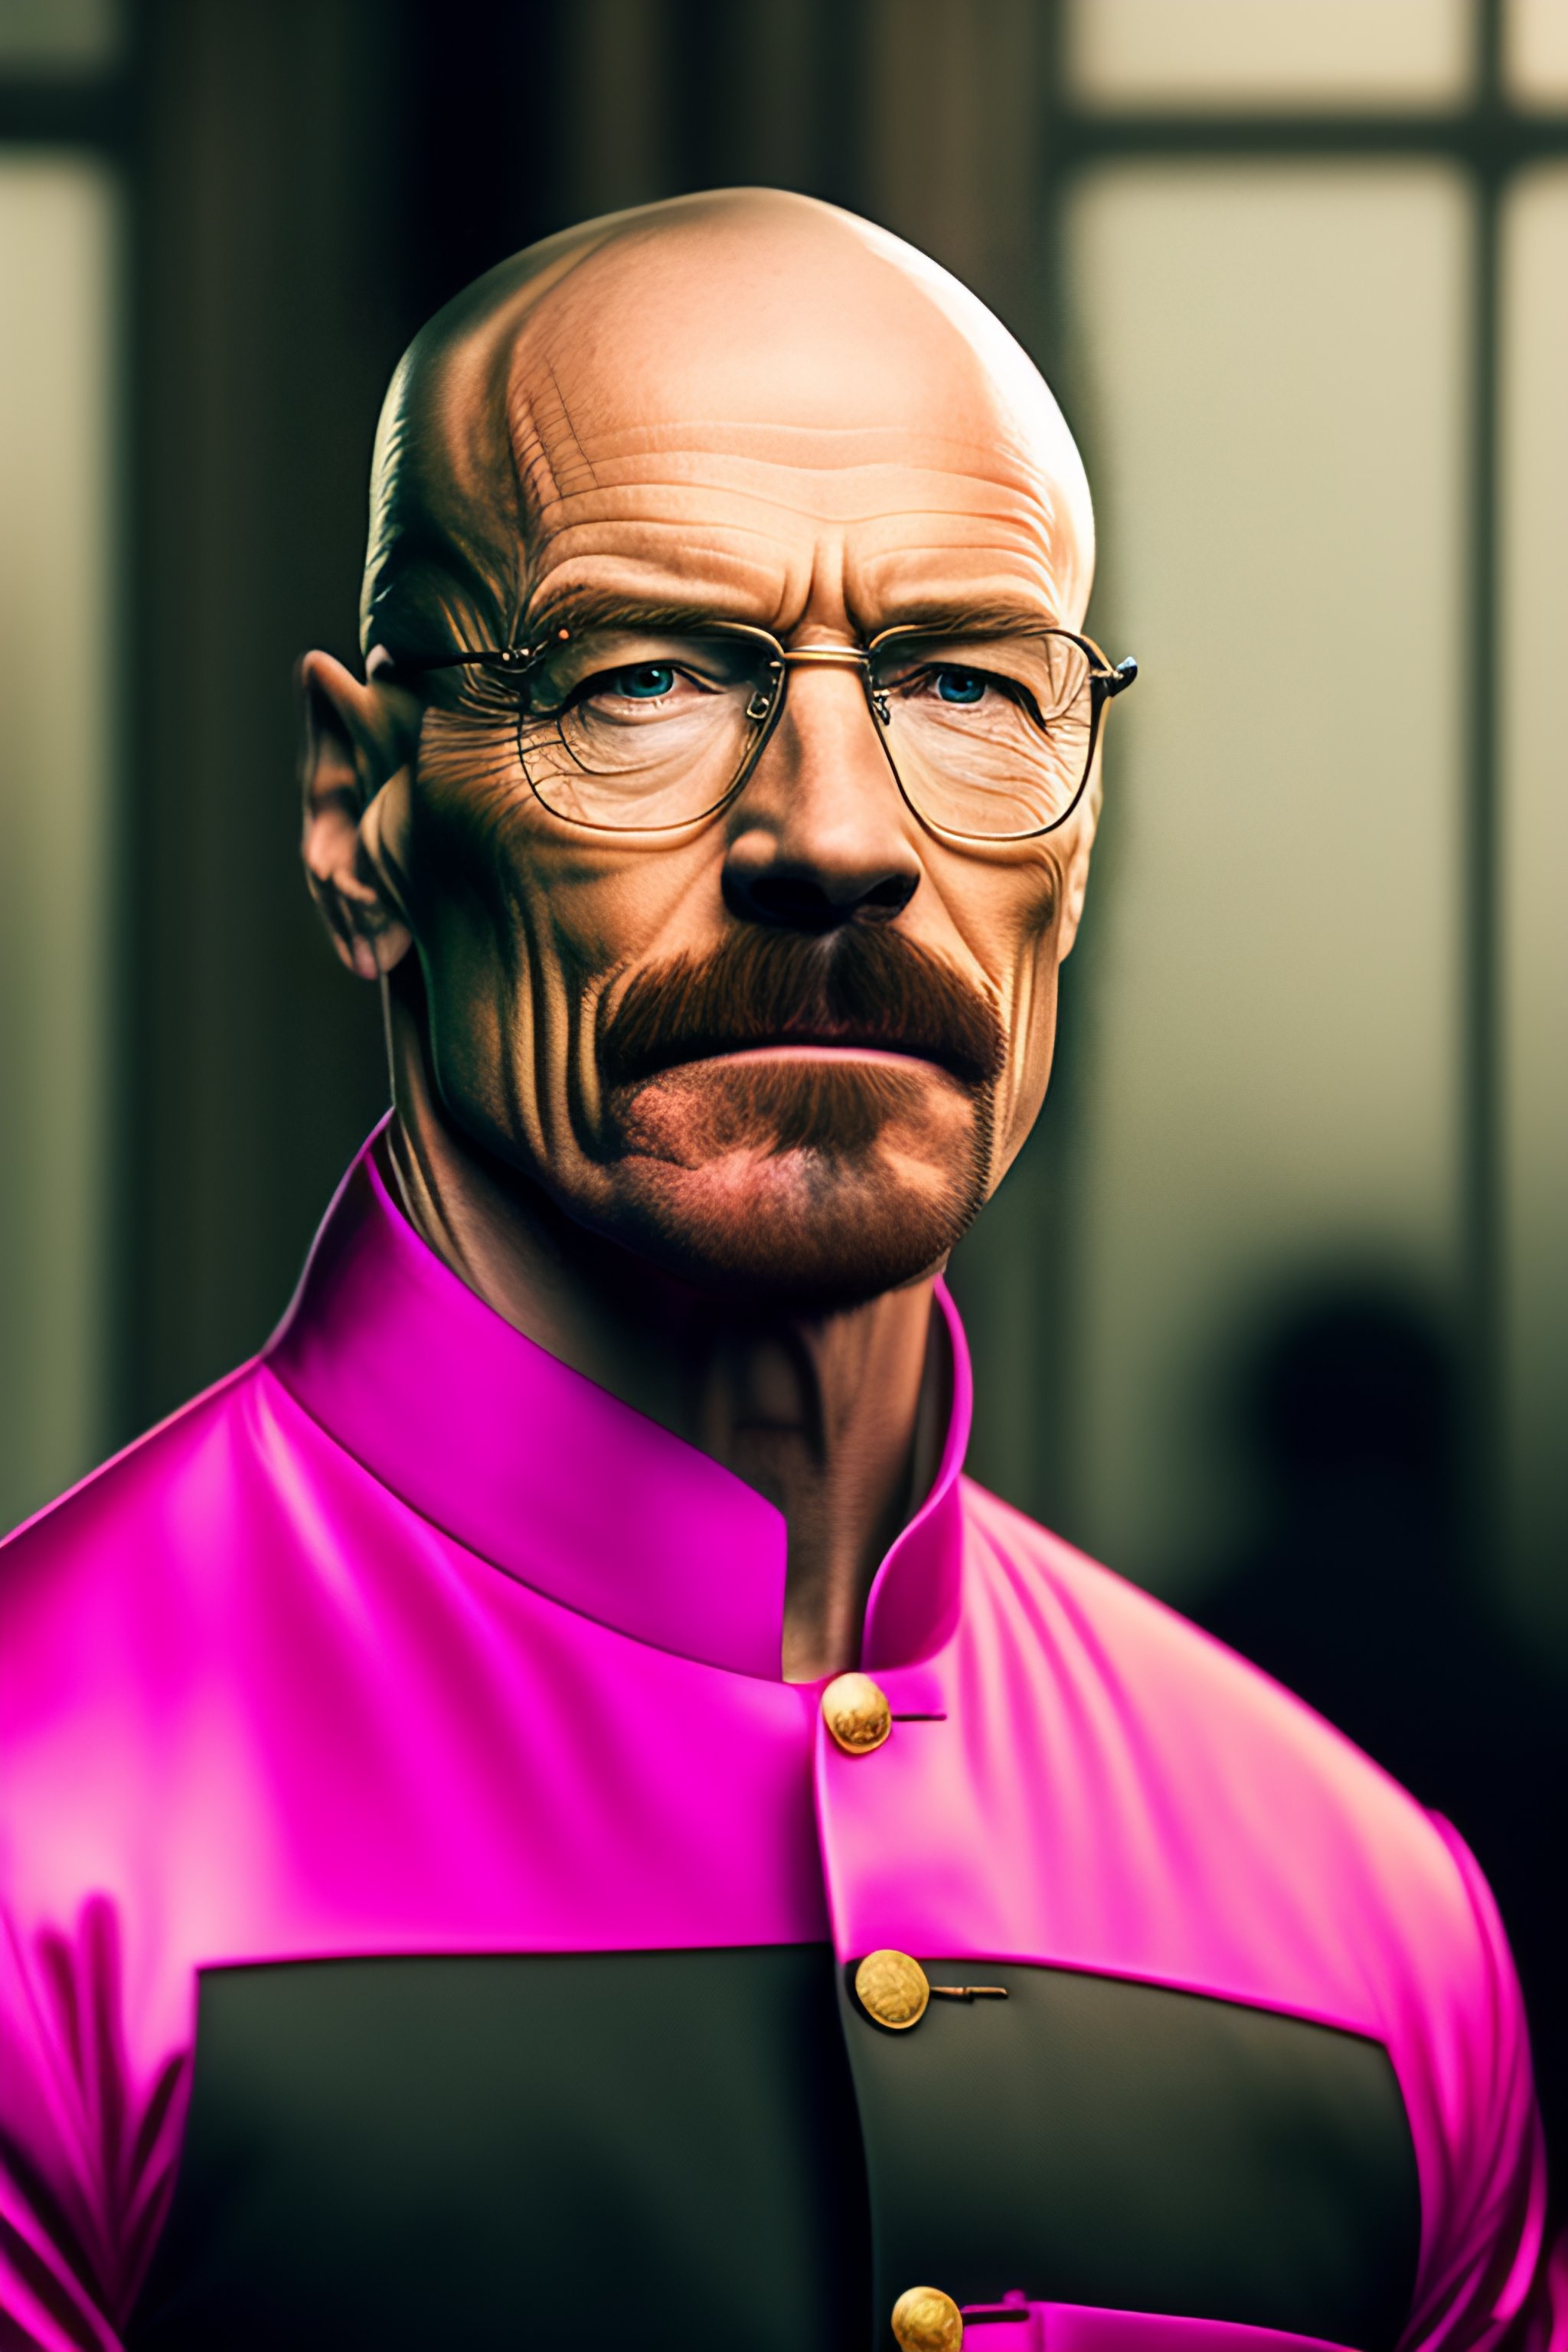 Lexica - A photo of walter white wearing a pink dress